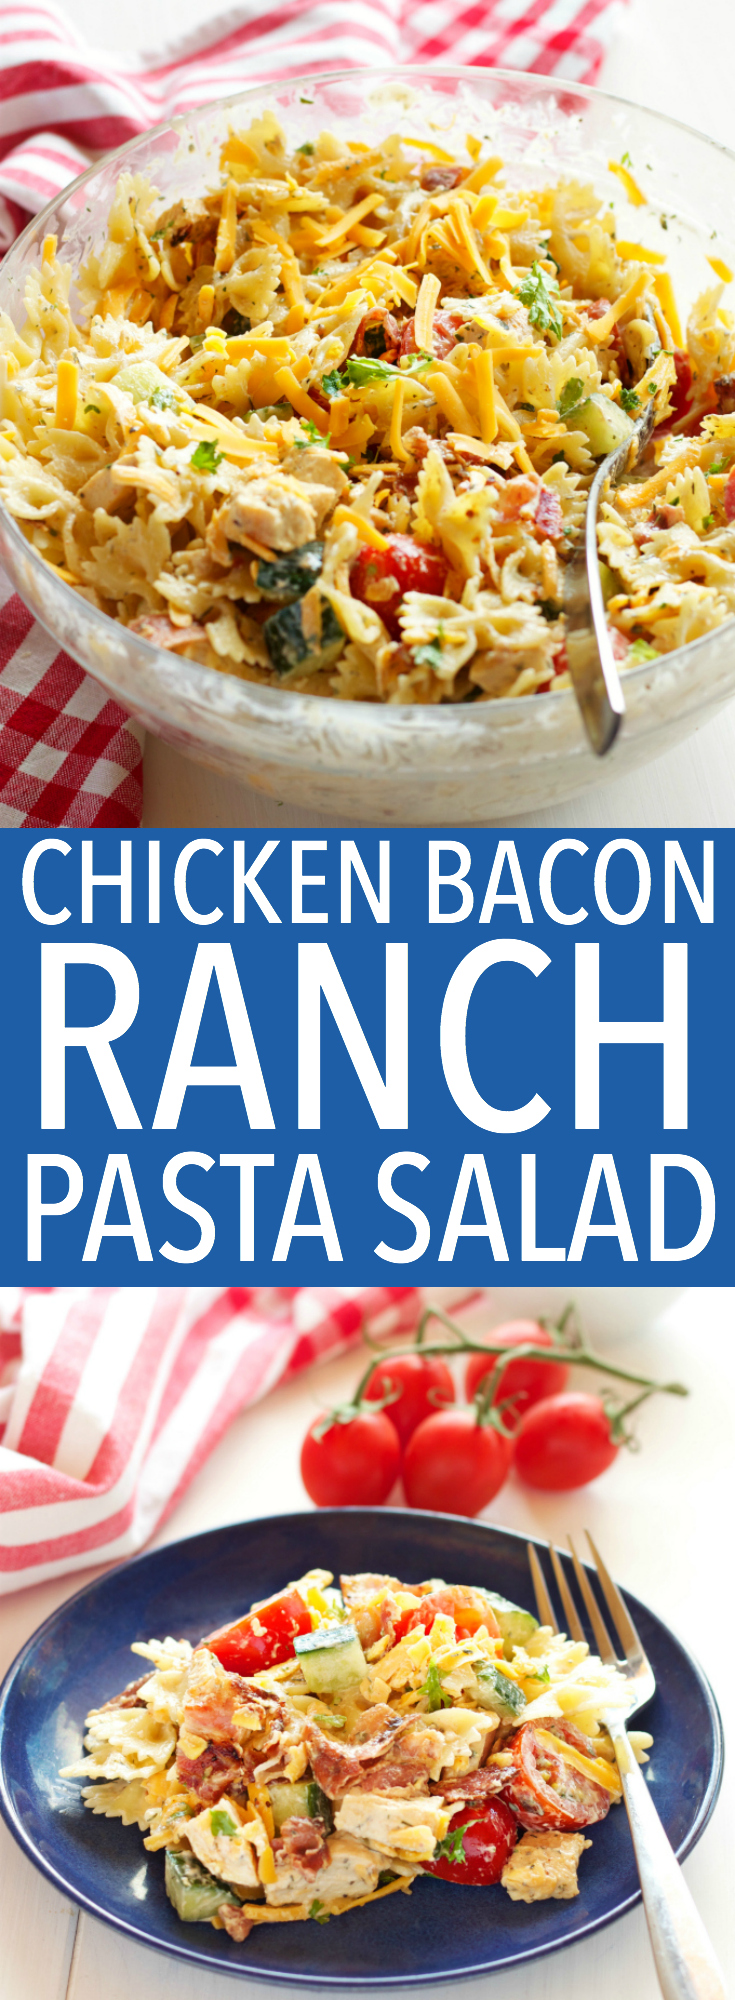 This Chicken Bacon Ranch Pasta Salad is the perfect summer pasta salad featuring grilled chicken, crispy bacon, veggies and creamy ranch dressing! Recipe from thebusybaker.ca via @busybakerblog